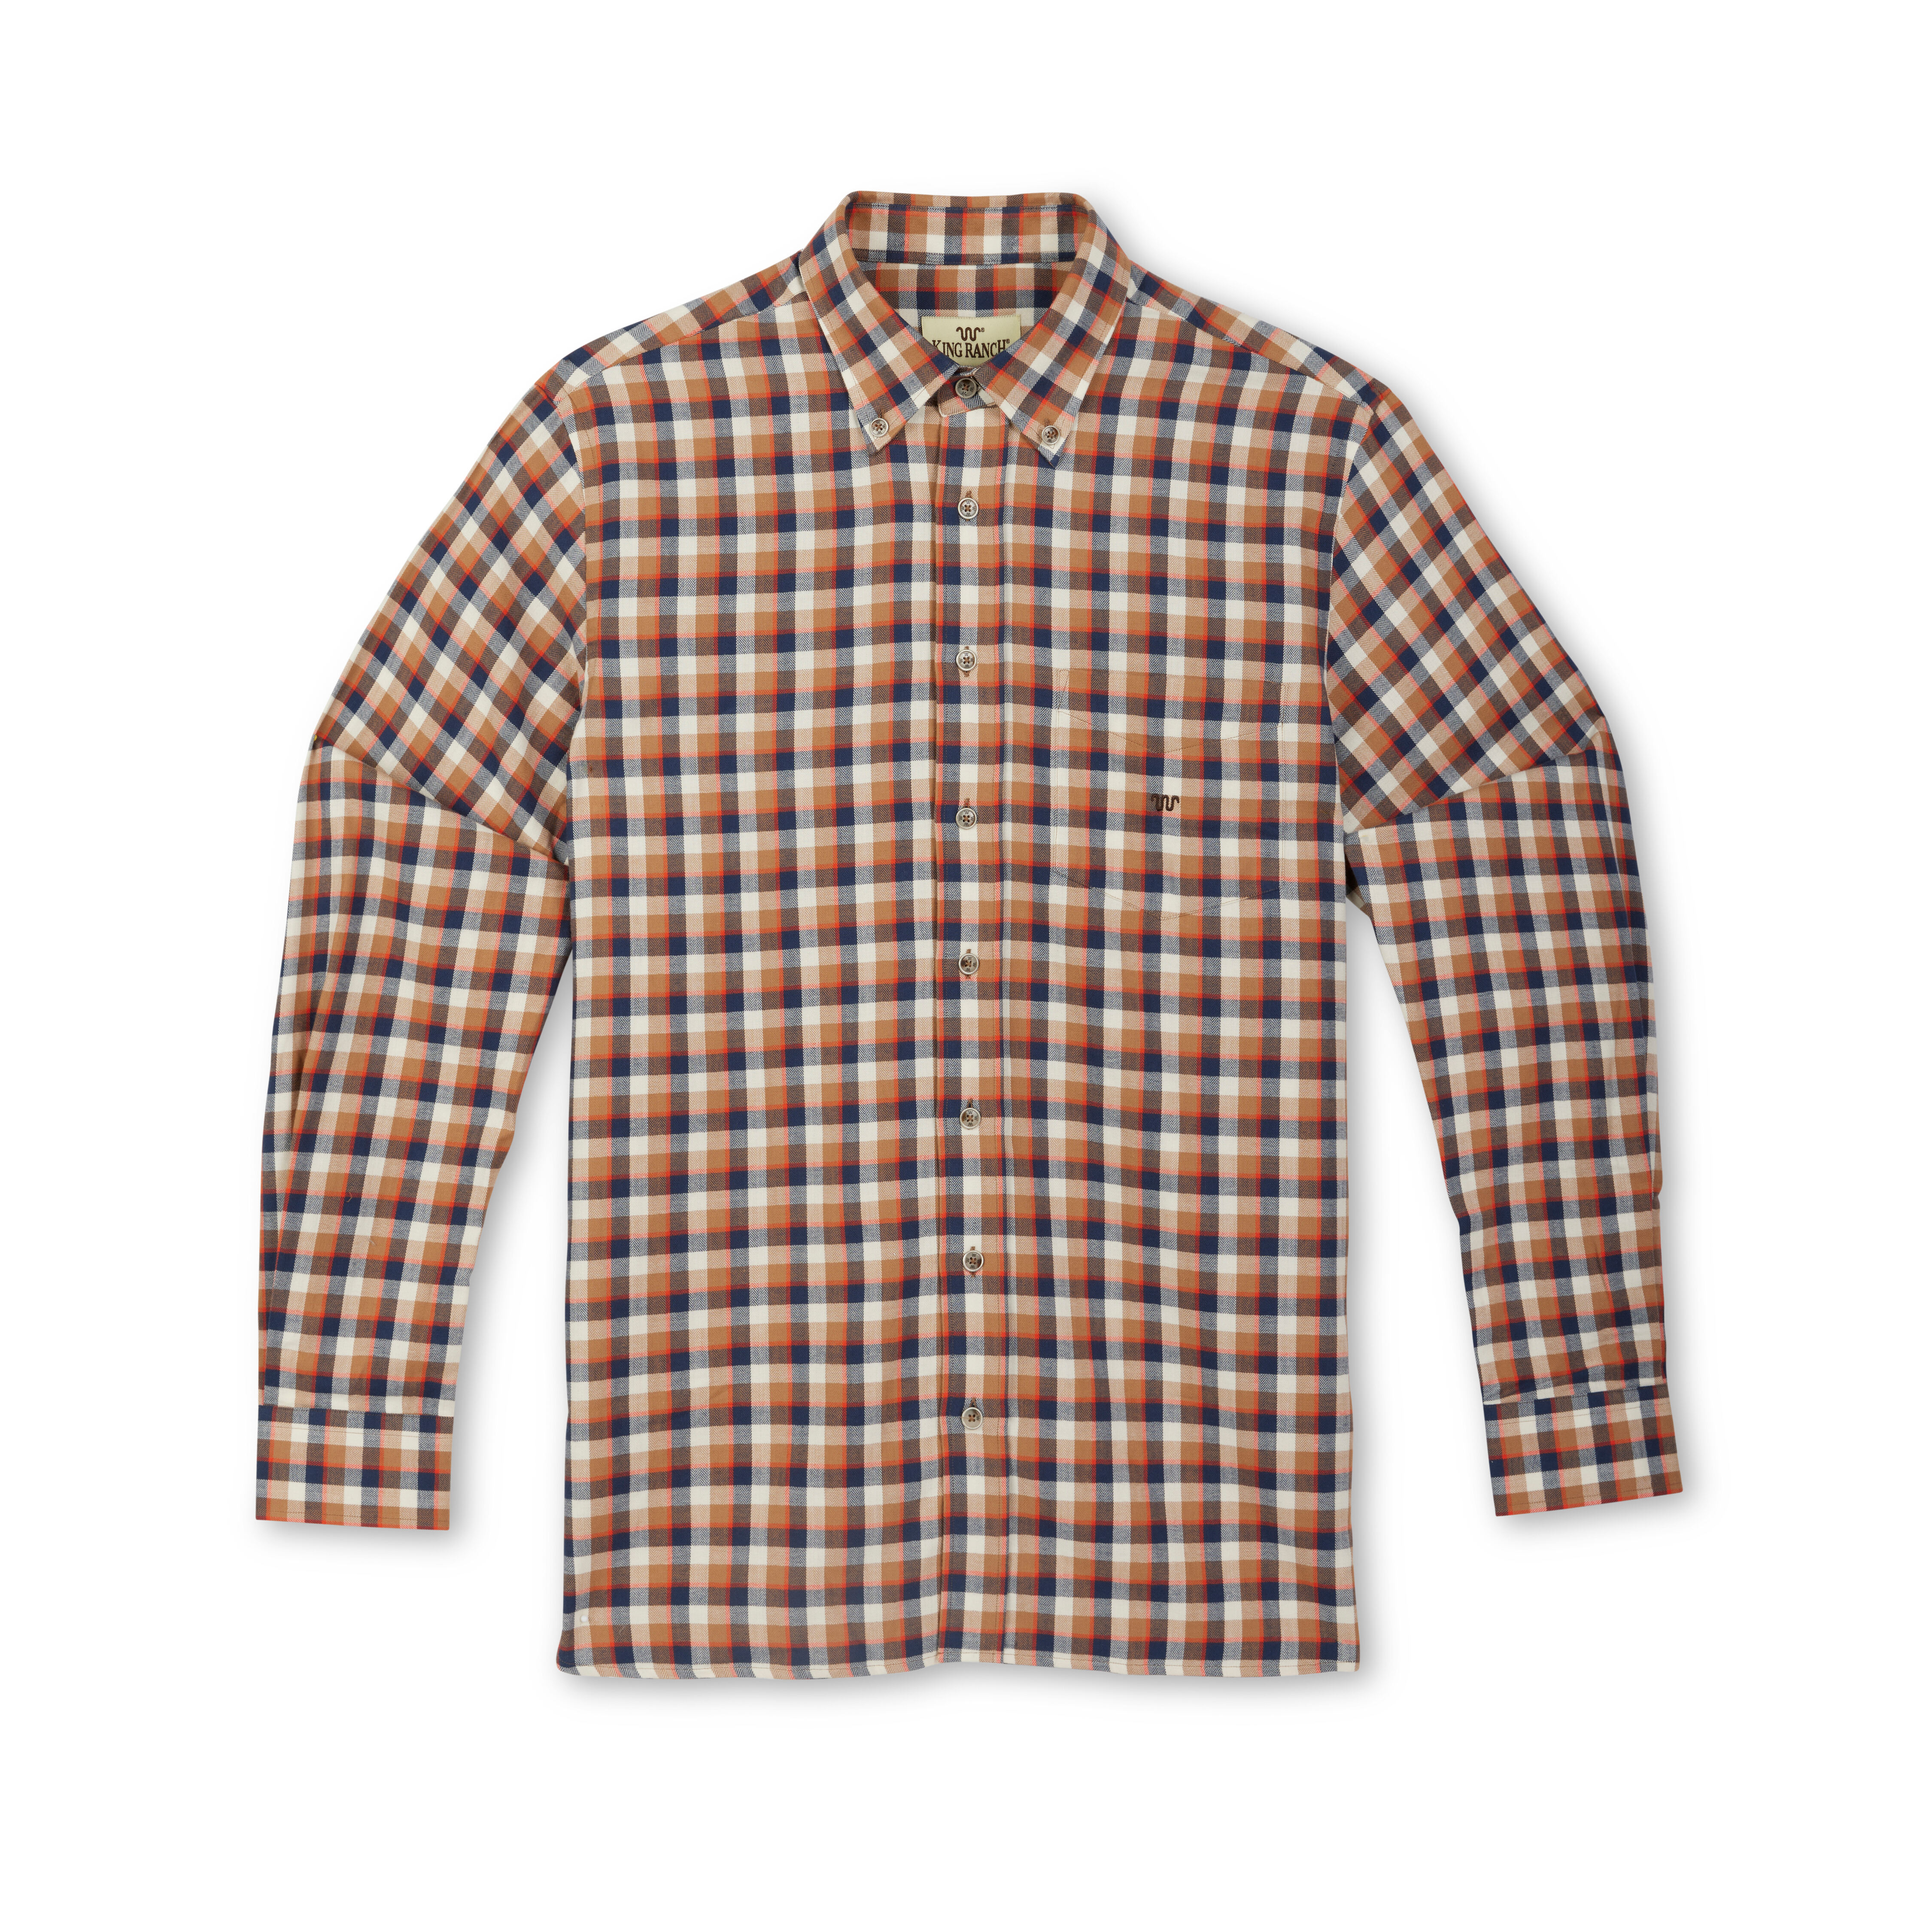 Blue and White Striped Collar Shirt - King Ranch Saddle Shop